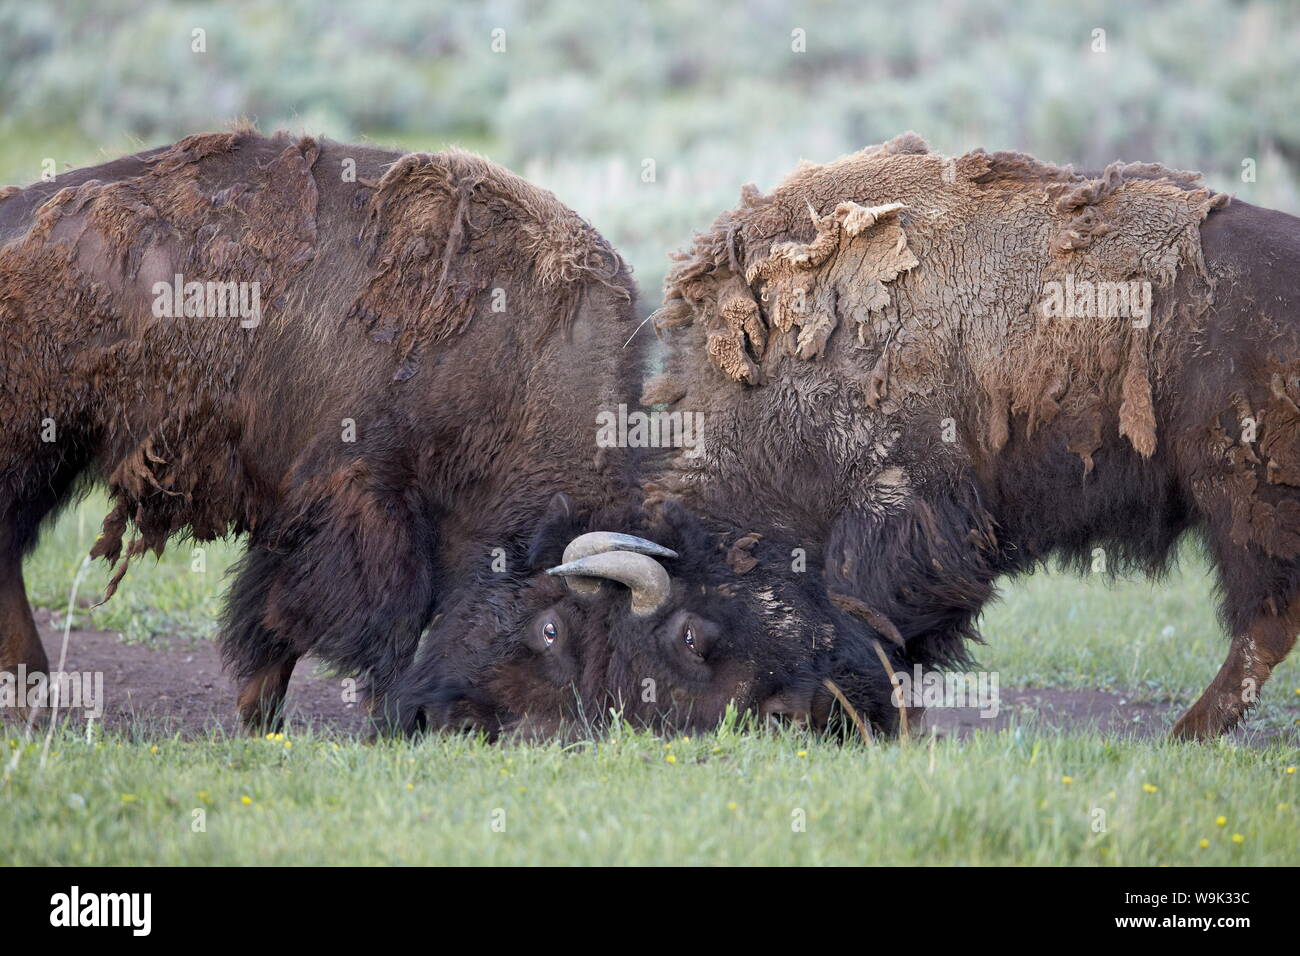 Two Bison (Bison bison) bulls sparring, Yellowstone National Park, Wyoming, United States of America, North America Stock Photo